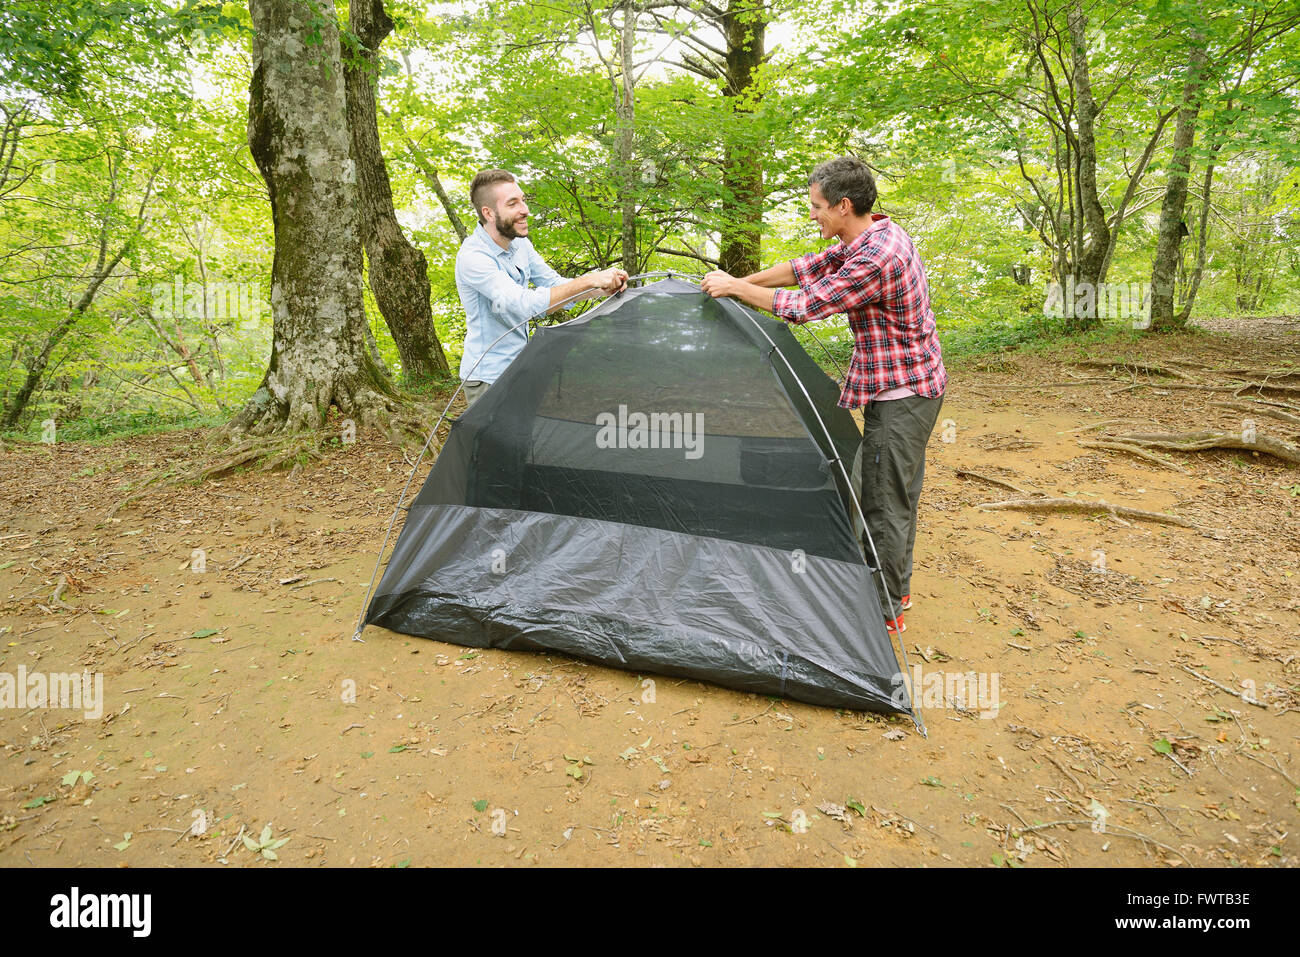 Friends putting up a tent at a camp site Stock Photo